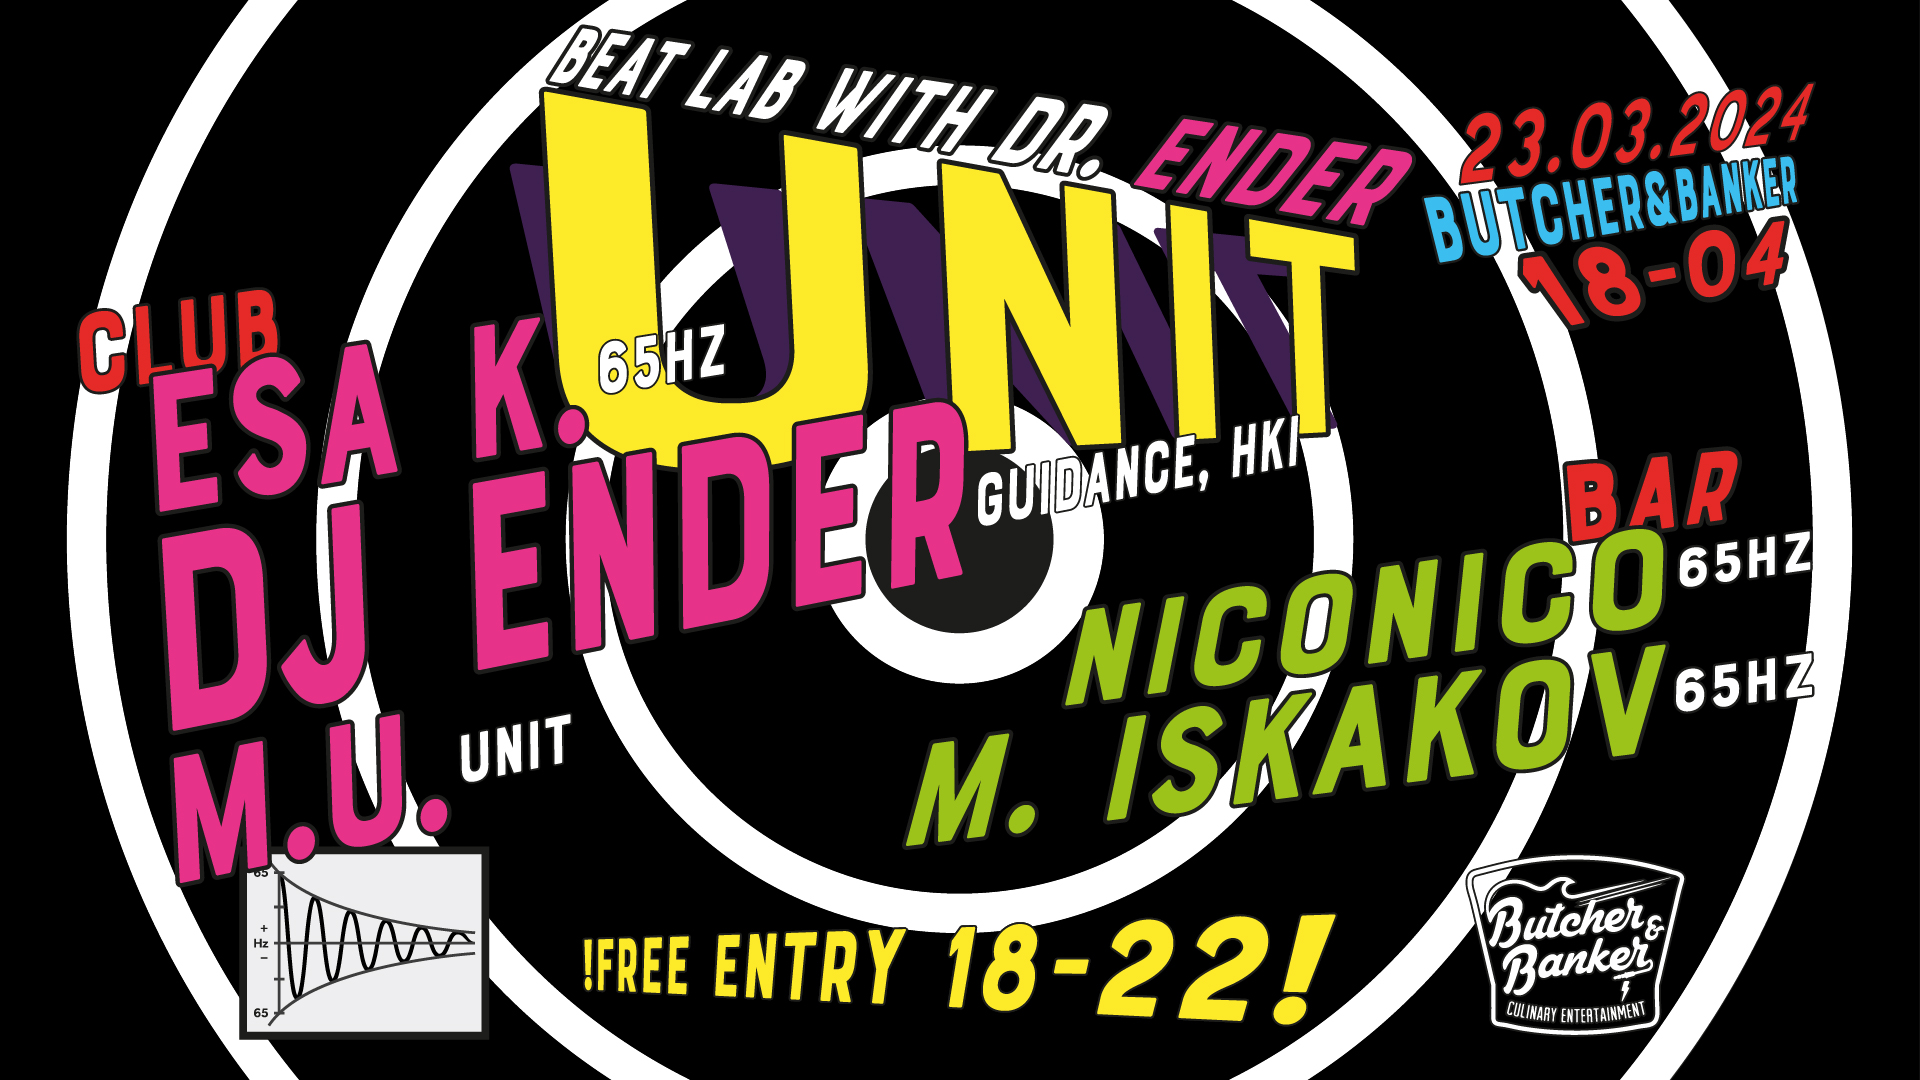 UNIT: Beat Lab with dr. Ender – 23.03.2024